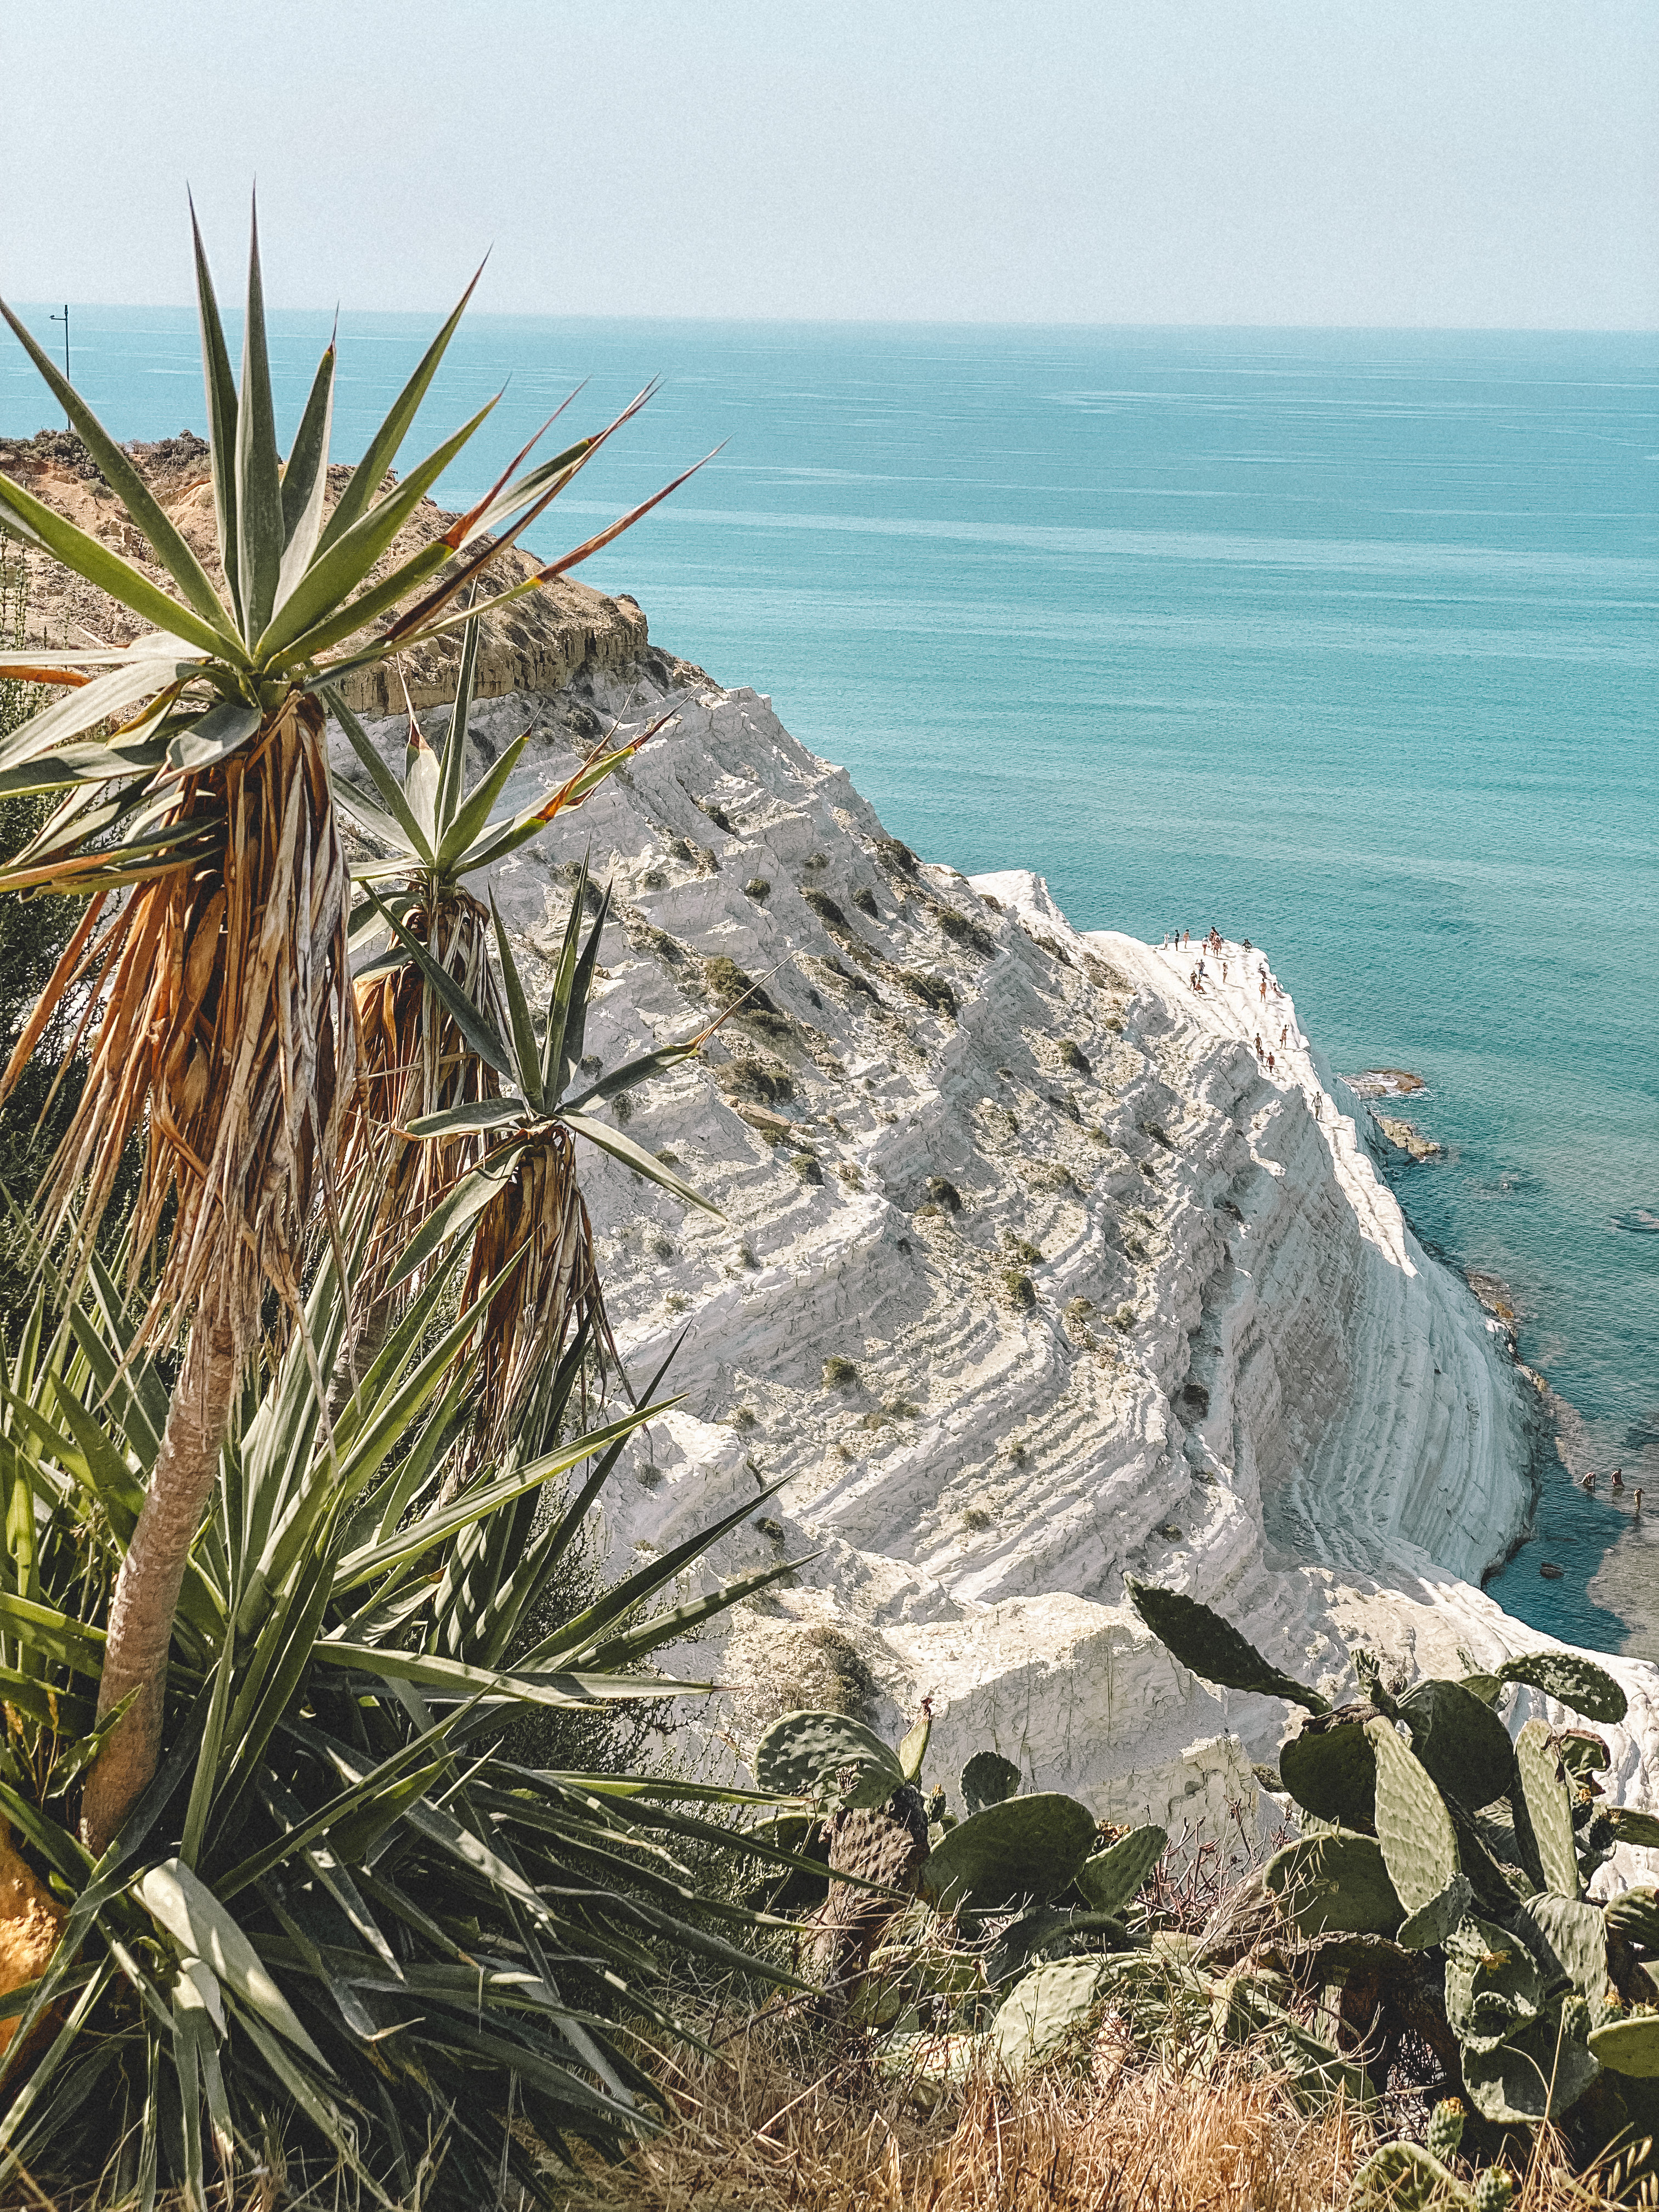 Everything you need to know for visiting the Scala dei Turchi in Sicily